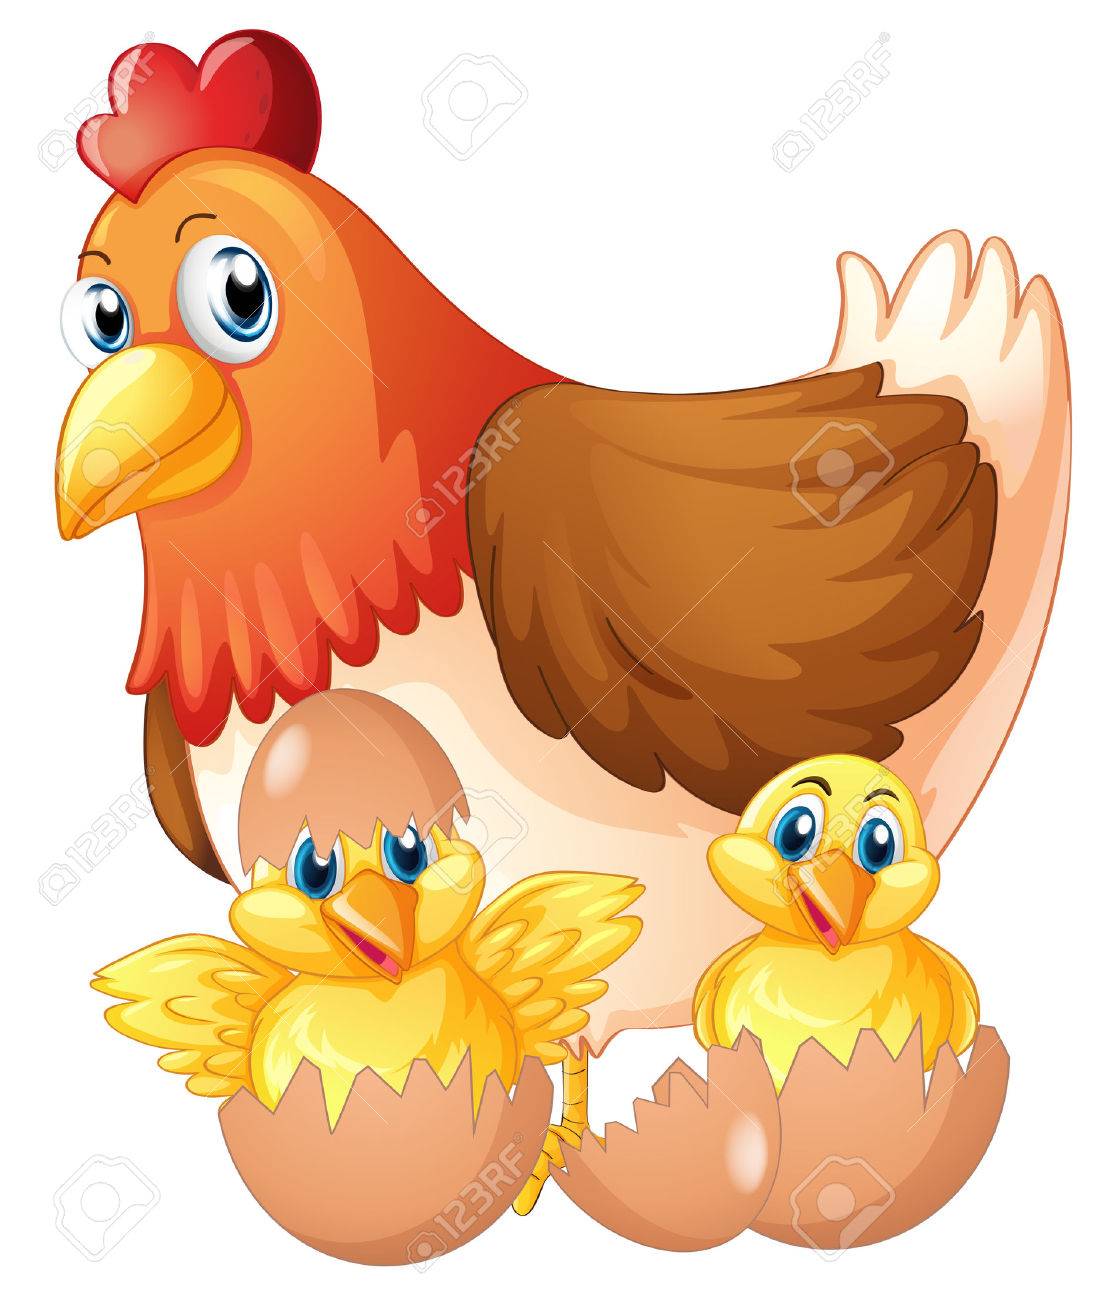 Mother hen and two chicks in eggs illustration.